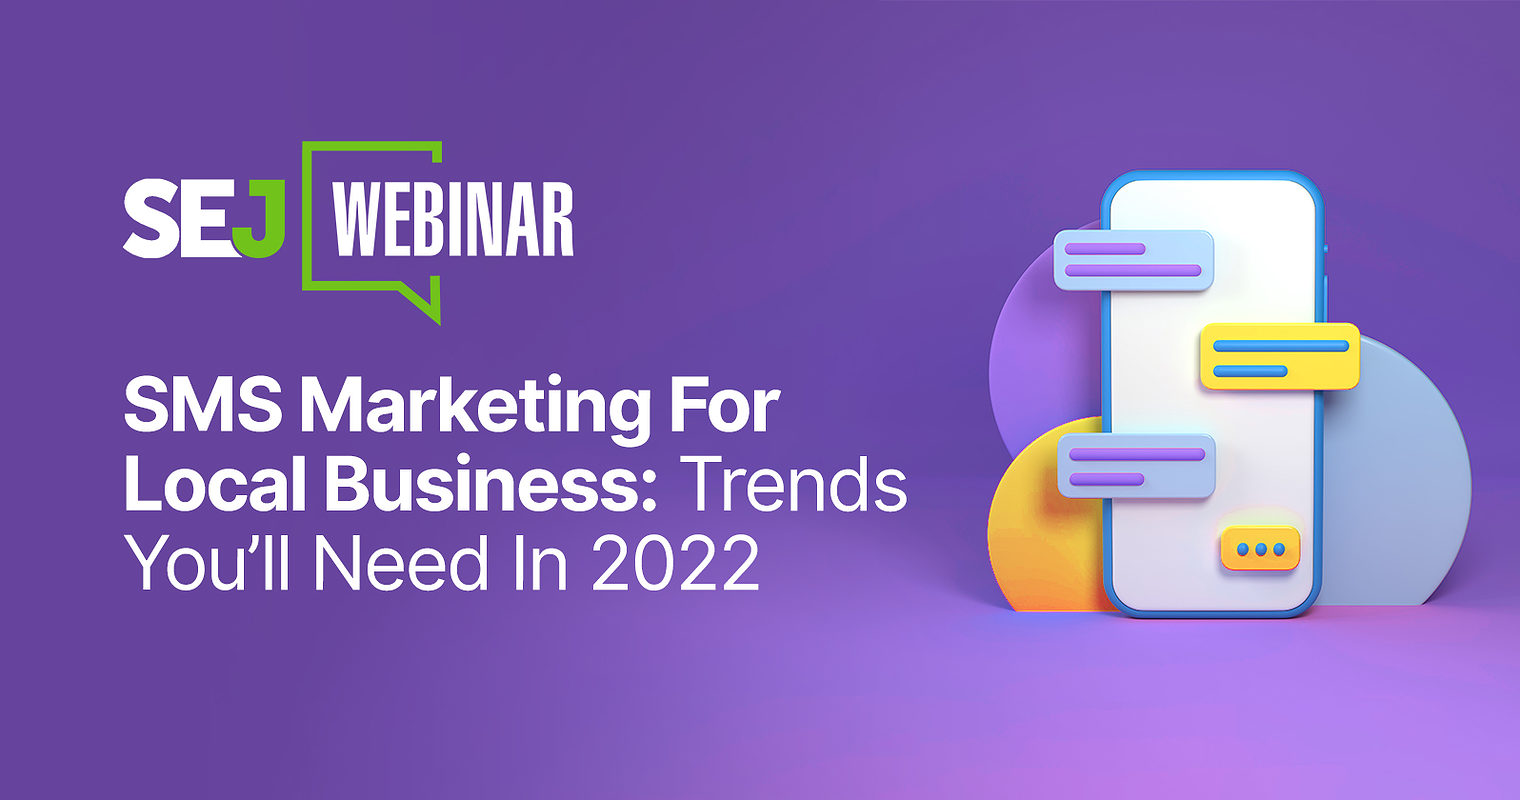 SMS Marketing For Local Business: Trends You’ll Need In 2022